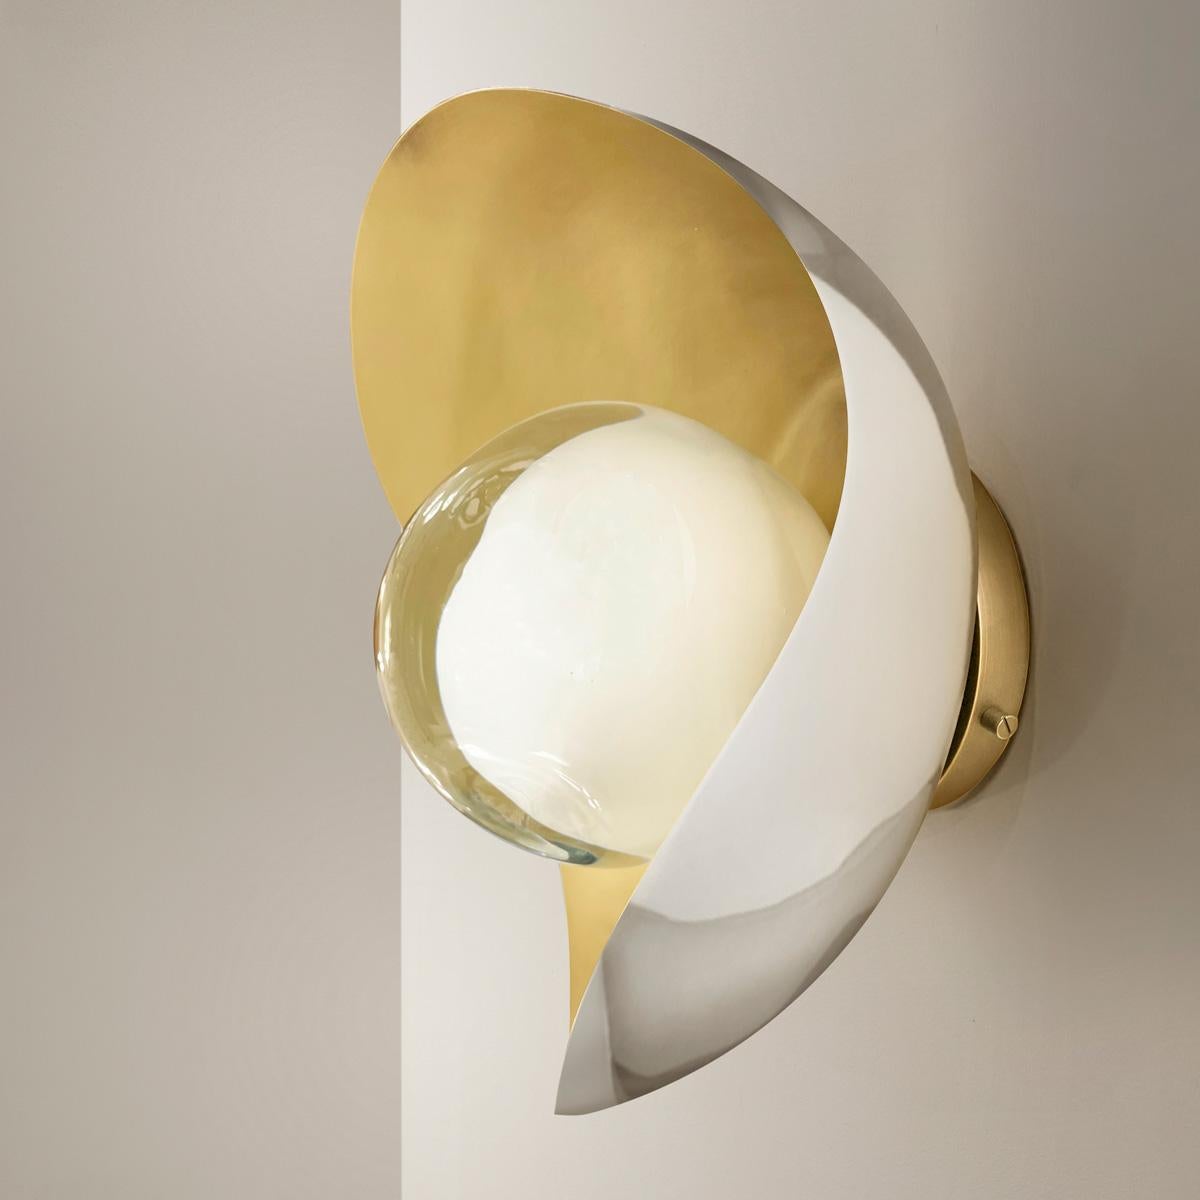 The Perla wall light features an organic brass shell nestling our Sfera glass handblown in Tuscany. The first images show the fixture with a satin brass interior and polished nickel exterior finish-subsequent pictures show it in a selection of